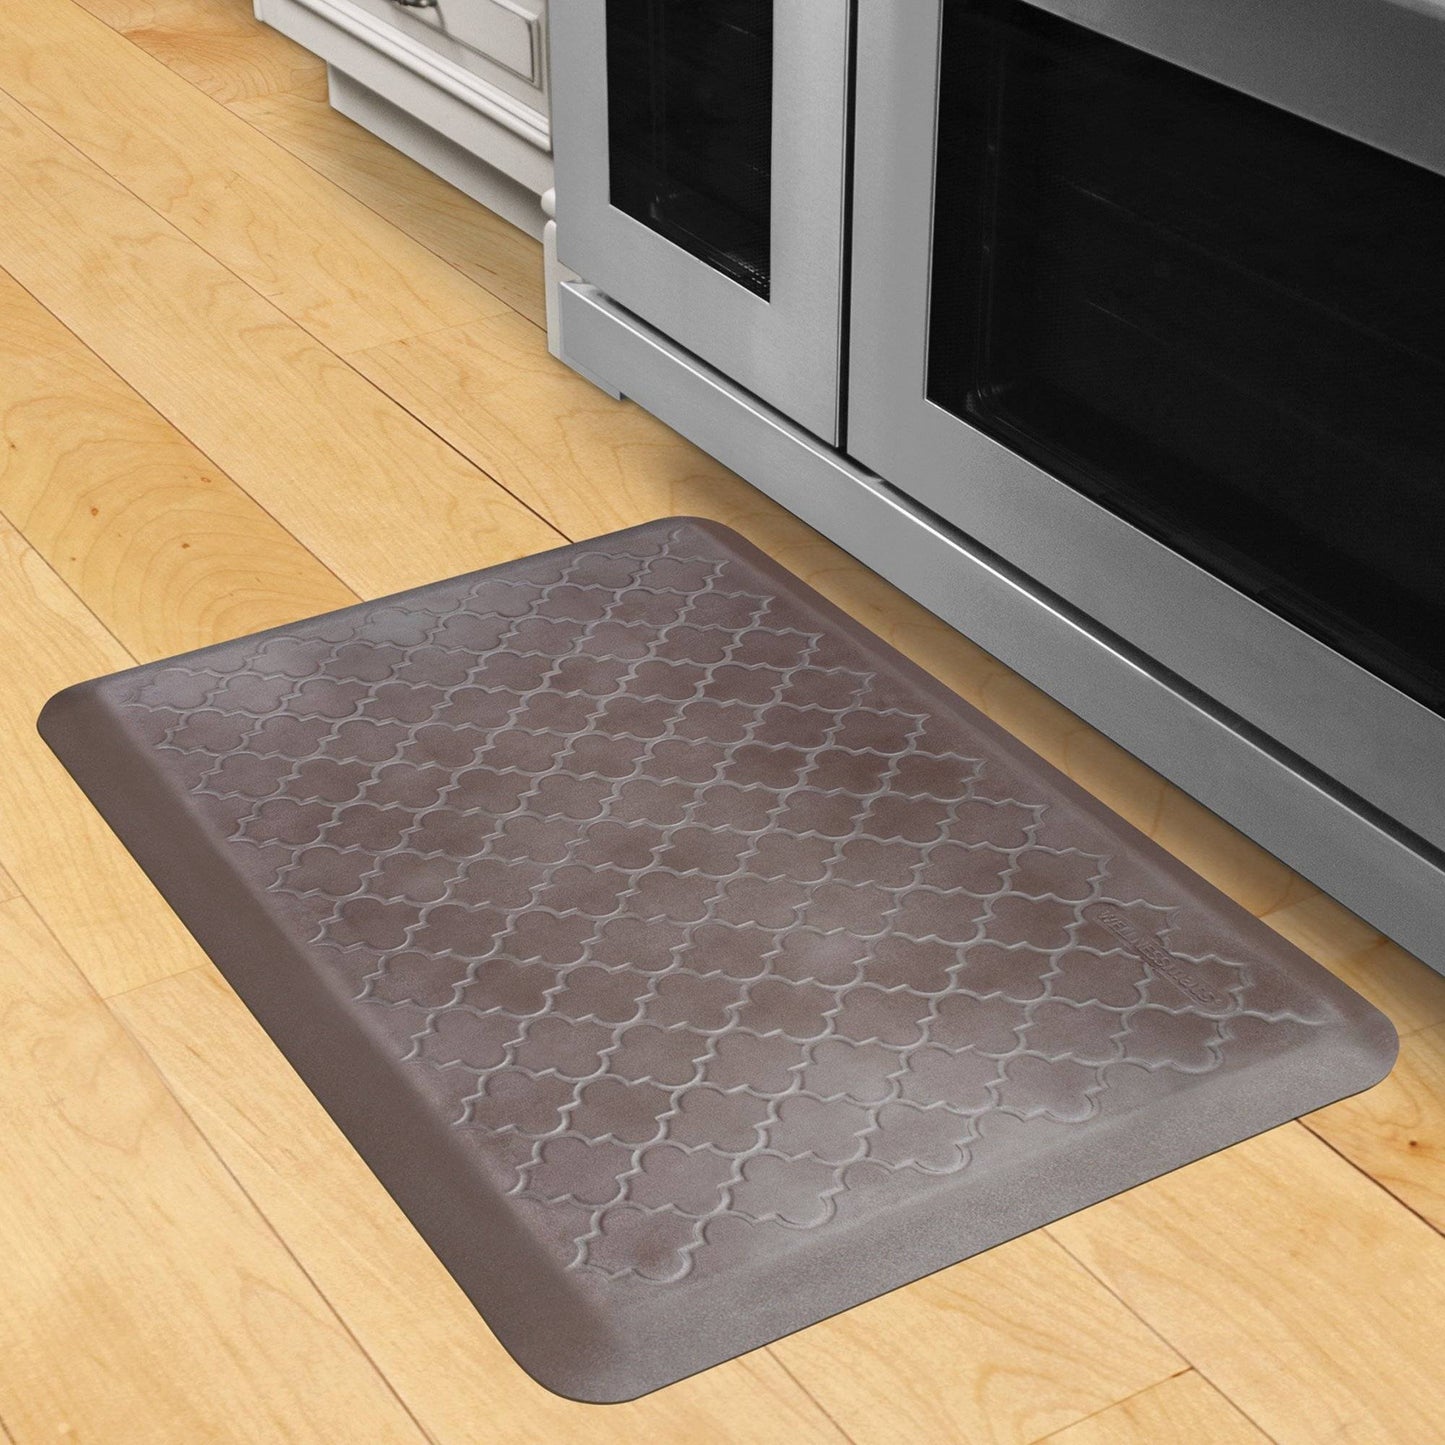 Wellnessmats Trellis Estates Shades of Silver ET32WMRBNBRN,Quartz A floor mat that has smooth surface. An ergo mat that gives comfort and relaxation while working in the kitchen or in any part of the house.